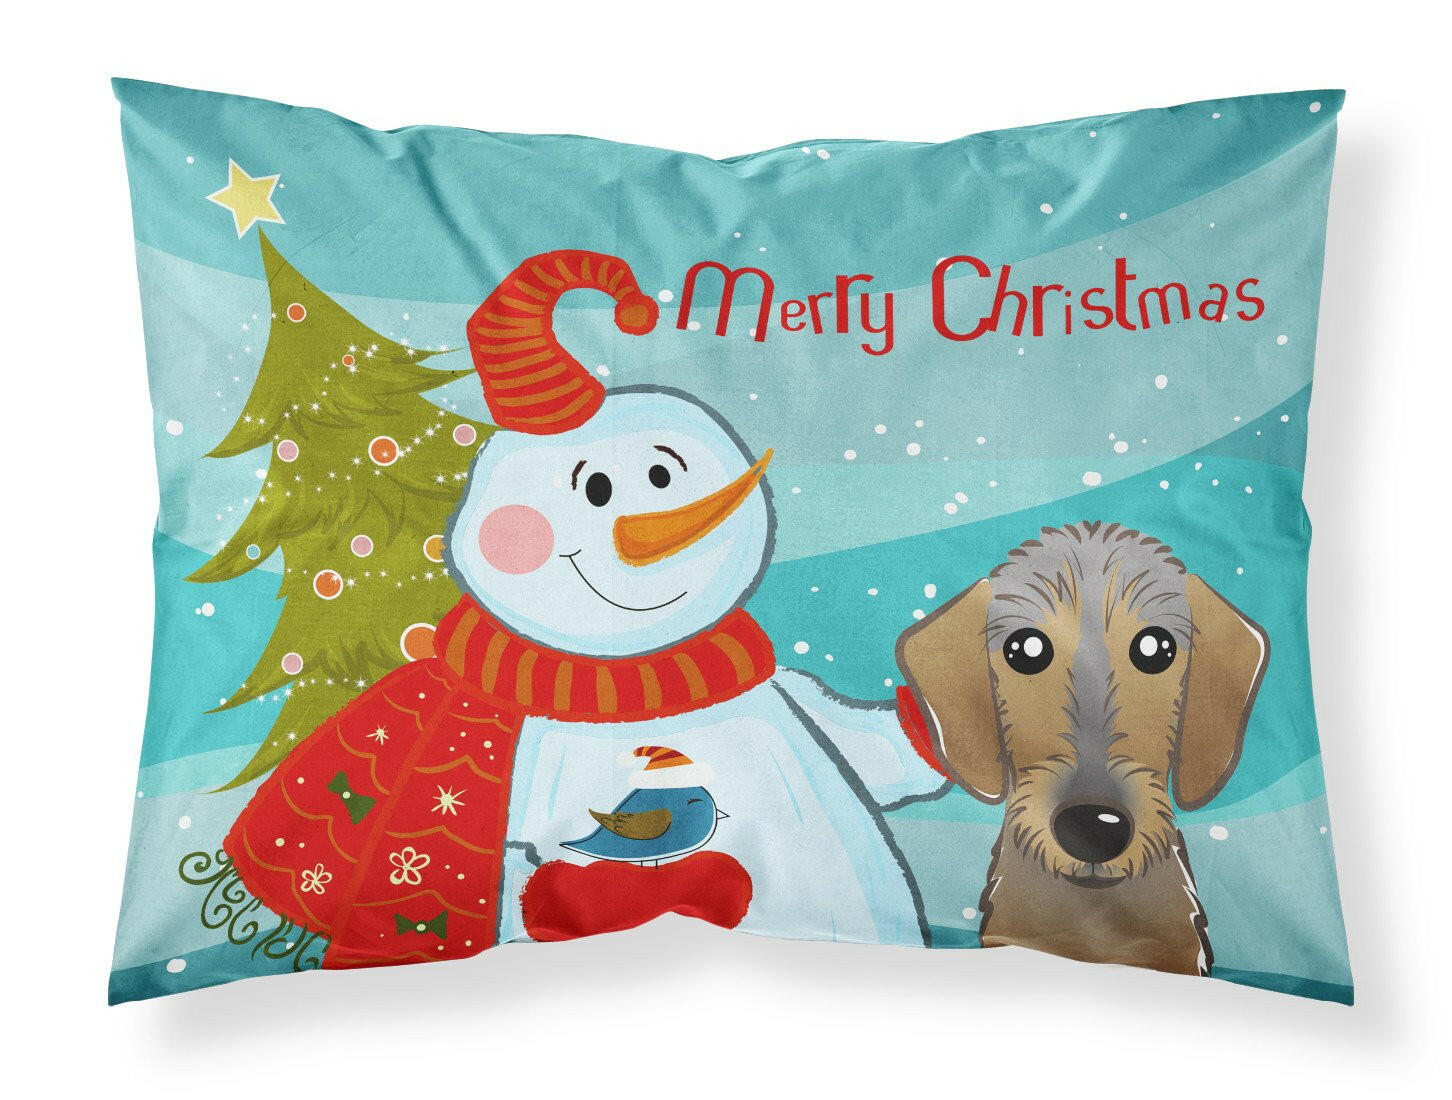 Snowman with Wirehaired Dachshund Fabric Standard Pillowcase BB1853PILLOWCASE by Caroline's Treasures